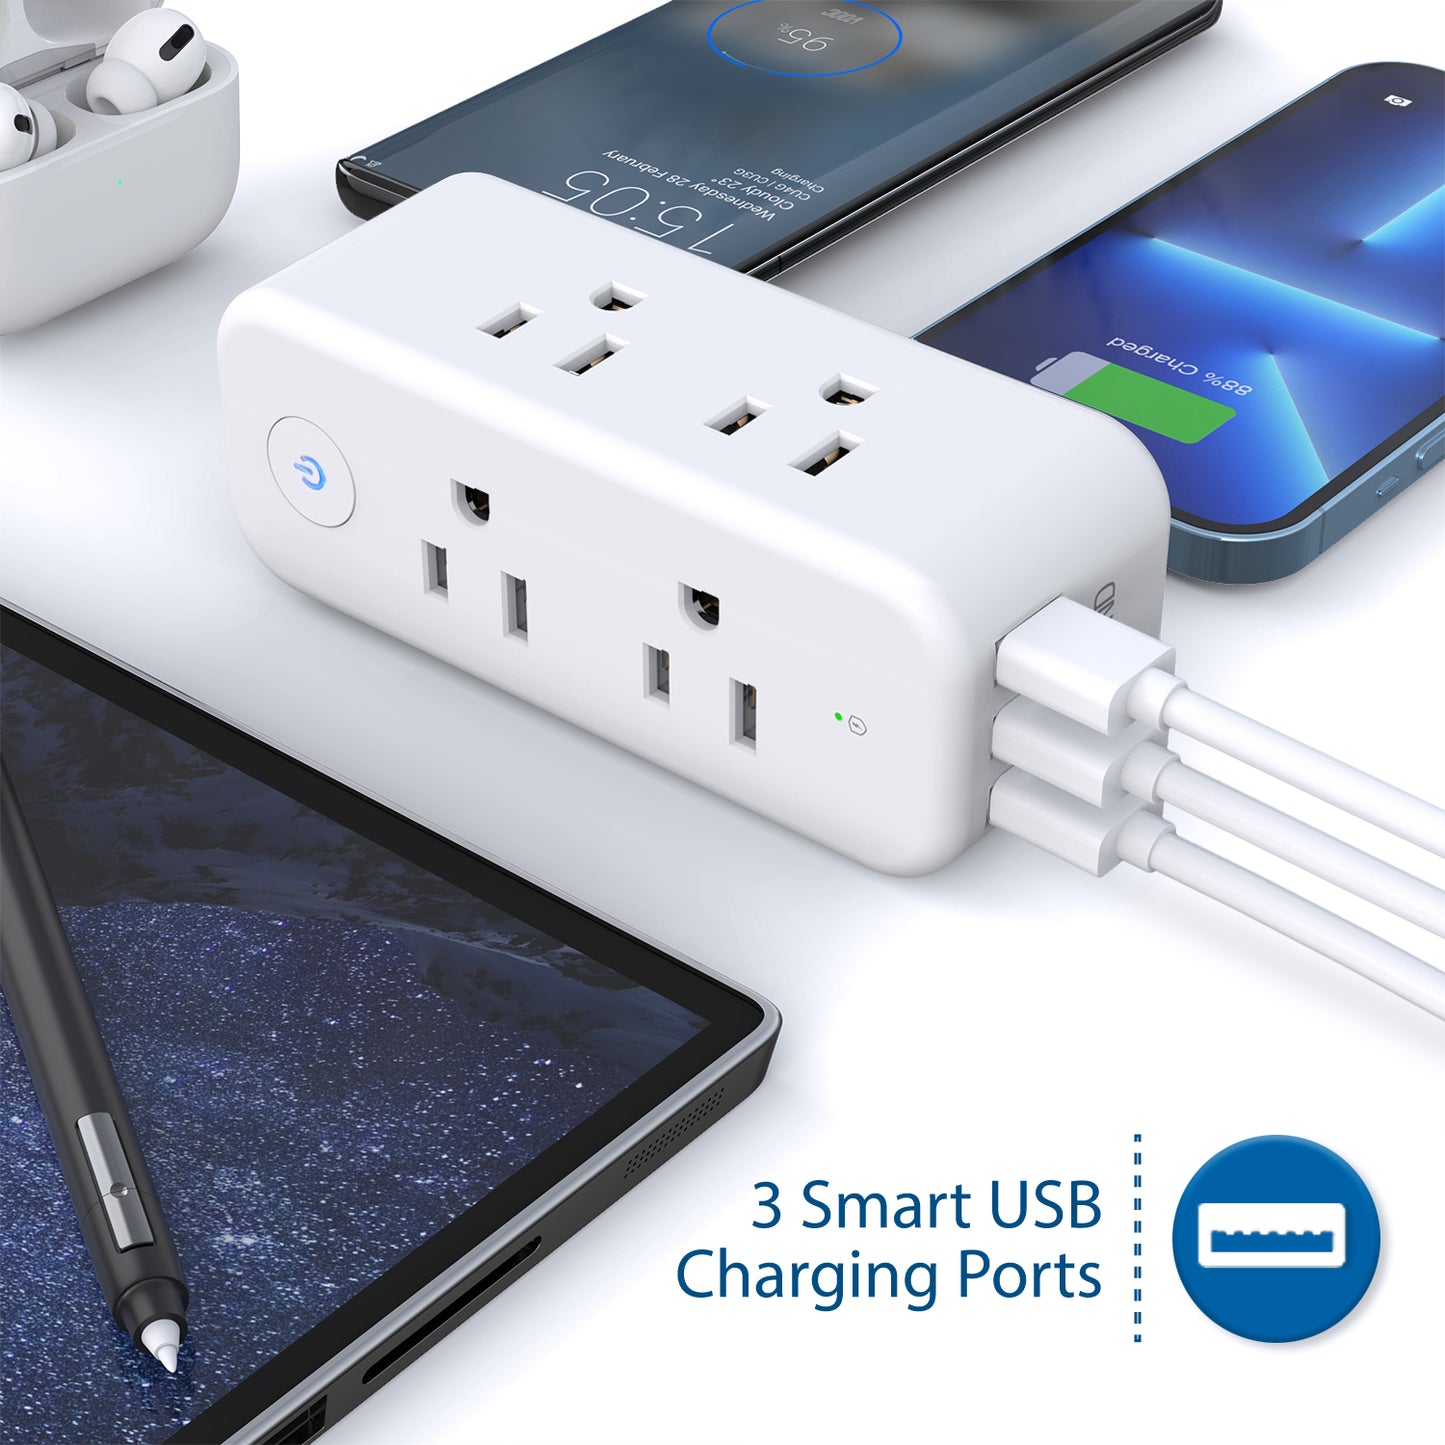 Outlet Extender Surge Protector USB - TROND Multi Plug Outlet Splitter with 360° Rotating Plug